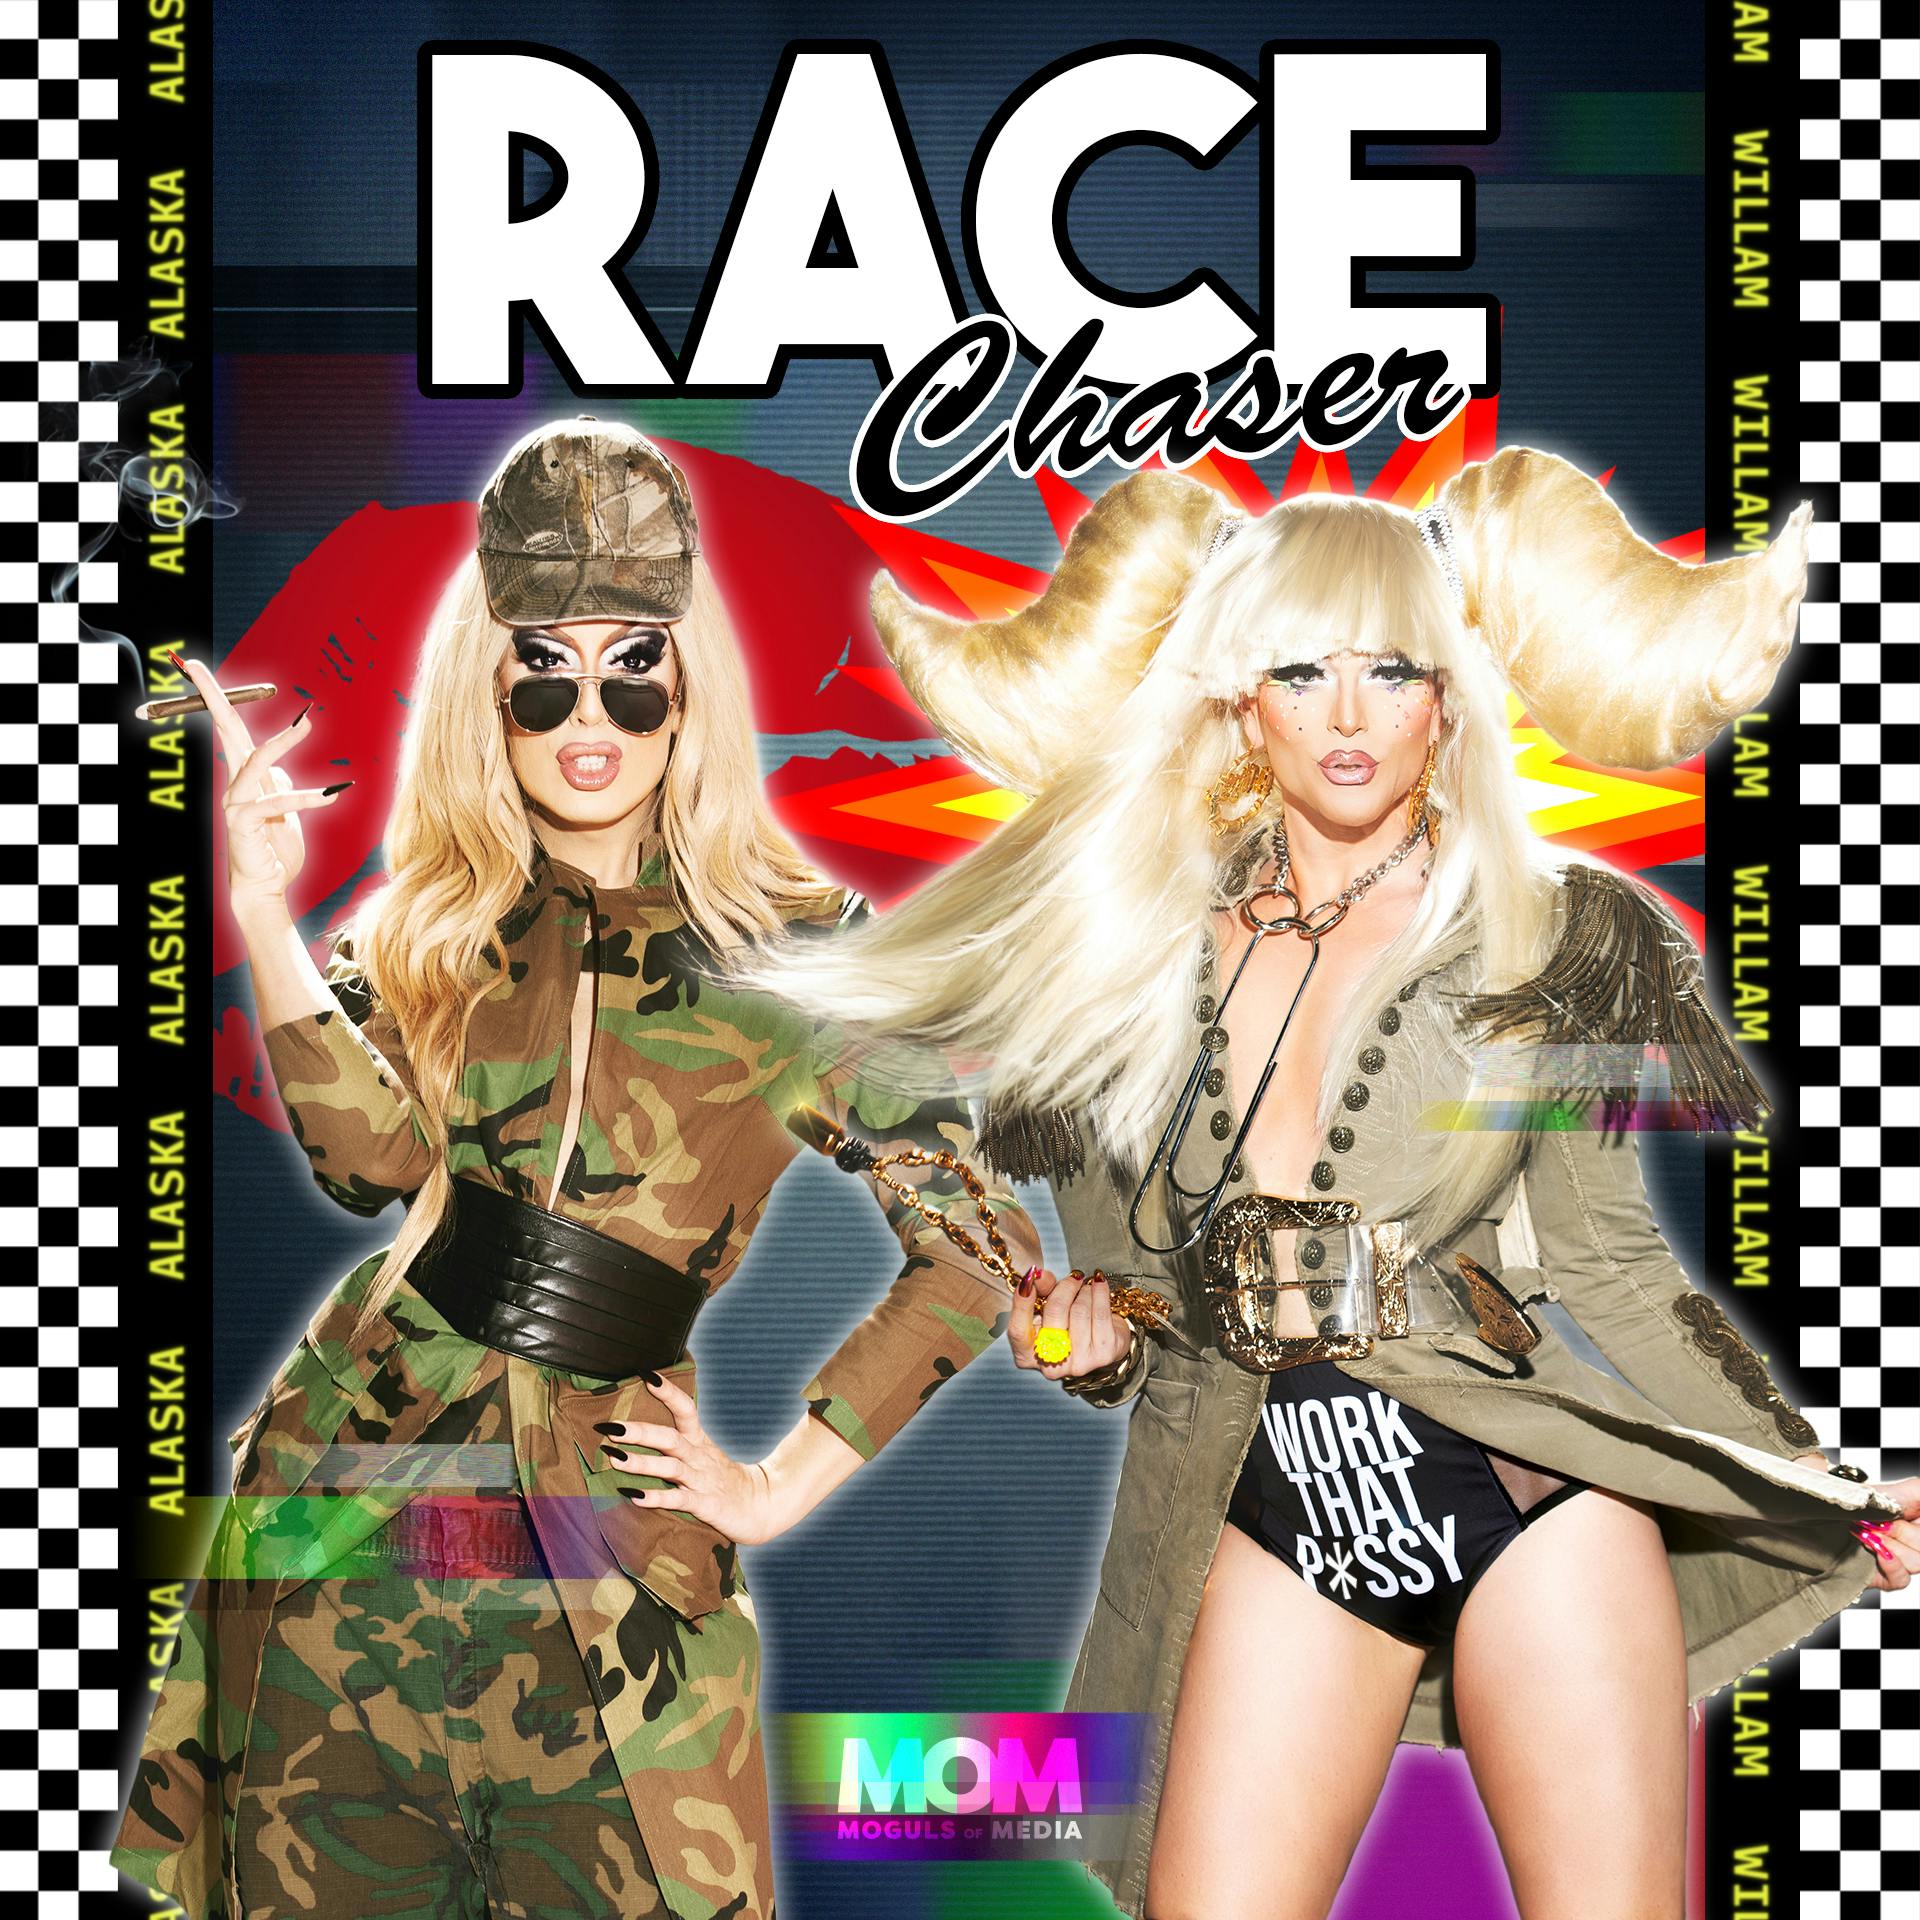 Race Chaser with Alaska & Willam podcast show image